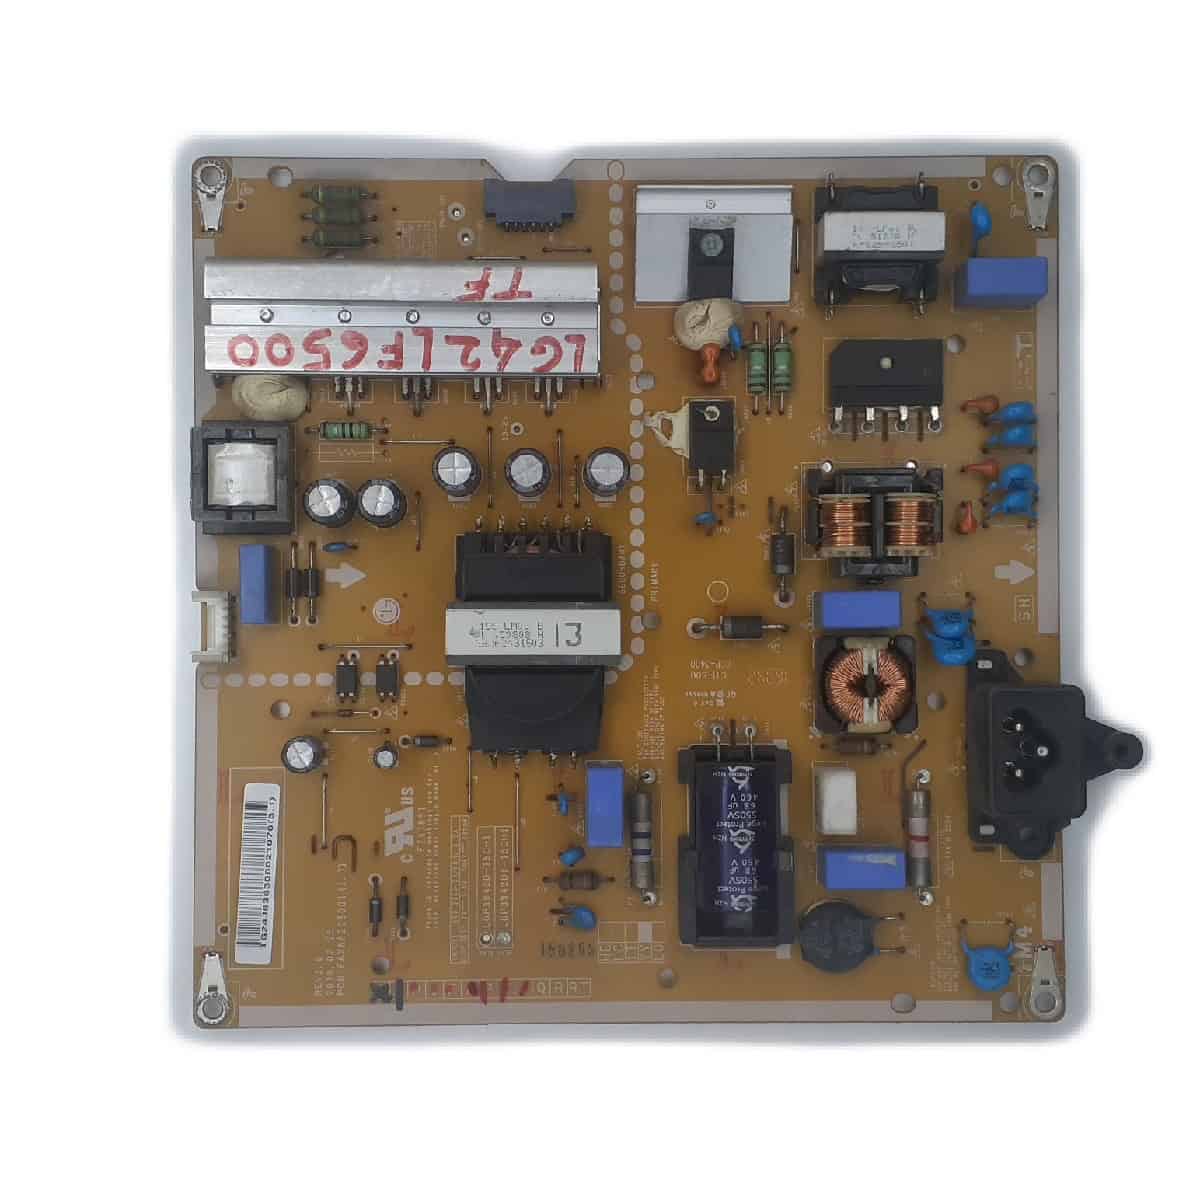 42LF6500 TF LG POWER SUPPLY BOARD FOR LED TV